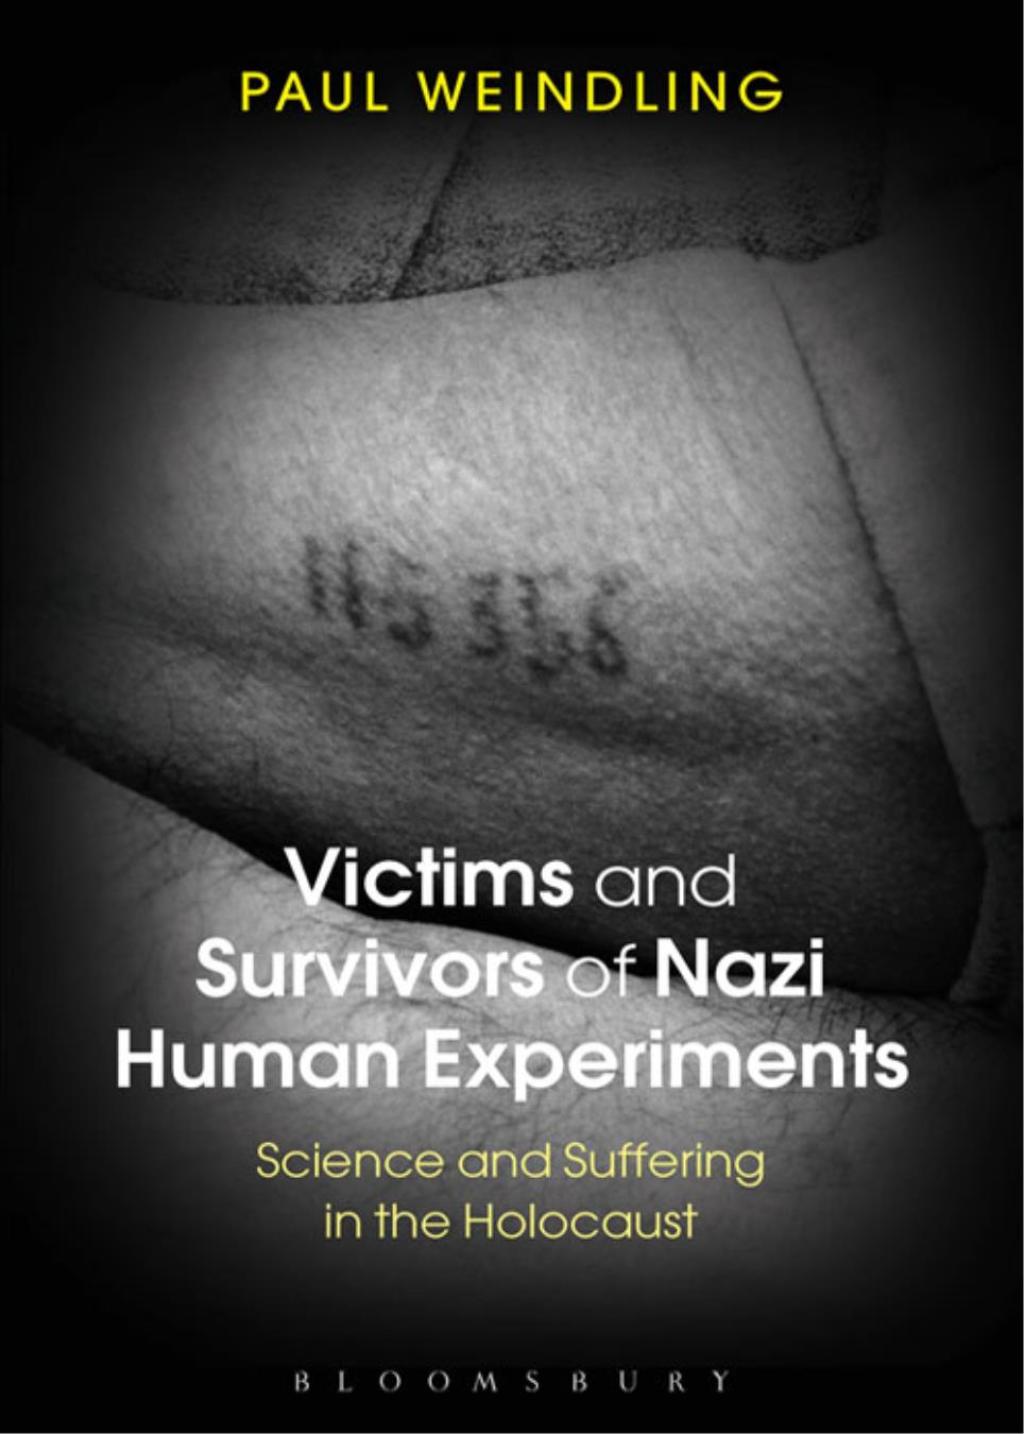 Victims and Survivors of Nazi Human Experiments (eBook) - Paul Weindling